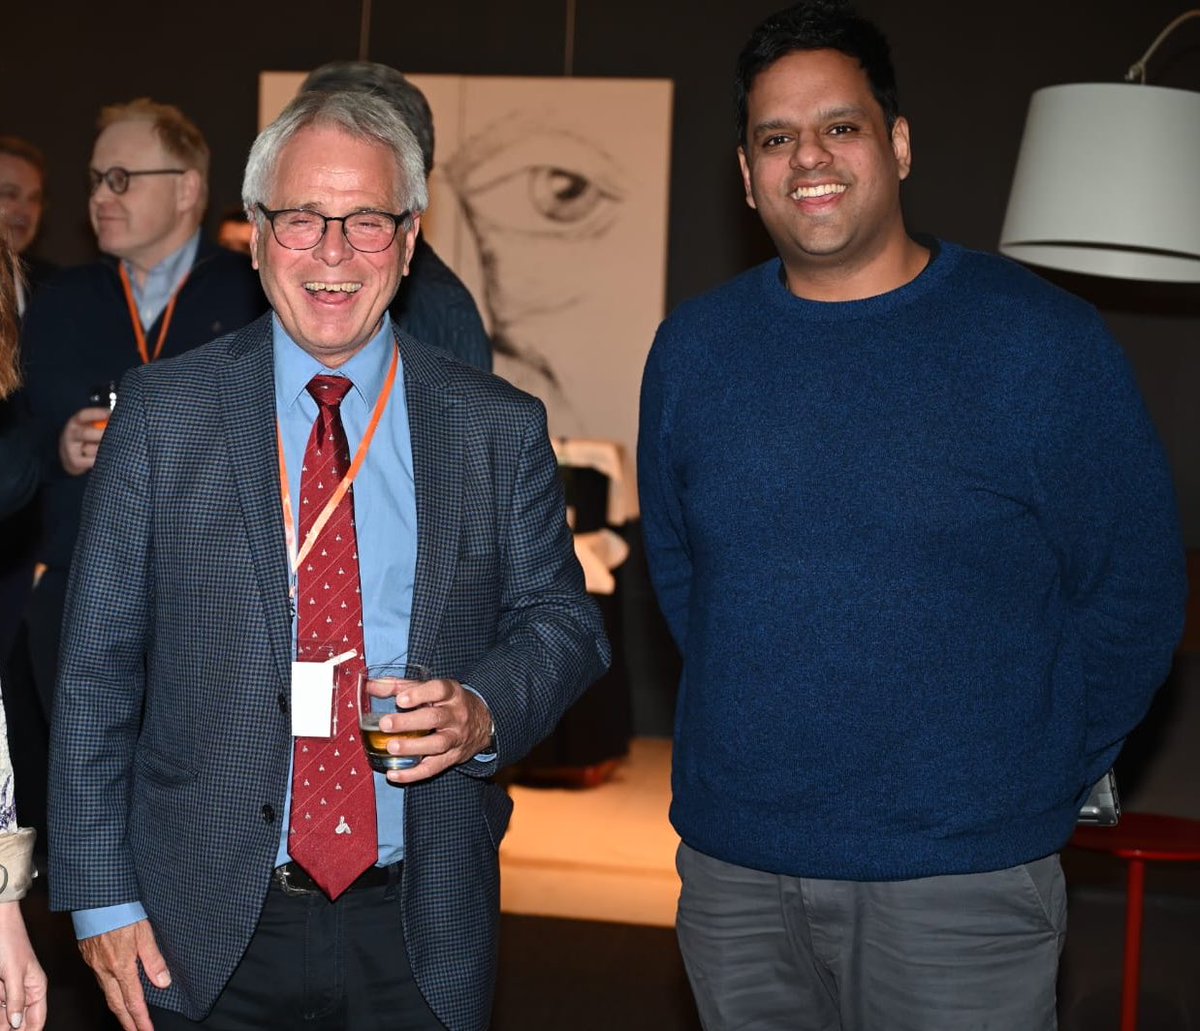 We had a great day ahead of the #IKCSEU24 main program, discussing key needs in #kidneycancer research at the Think Tank, a surgery-focused workshop for young clinicians, and faculty reception. Thanks to our early attendees and we look forward to seeing everyone tomorrow!